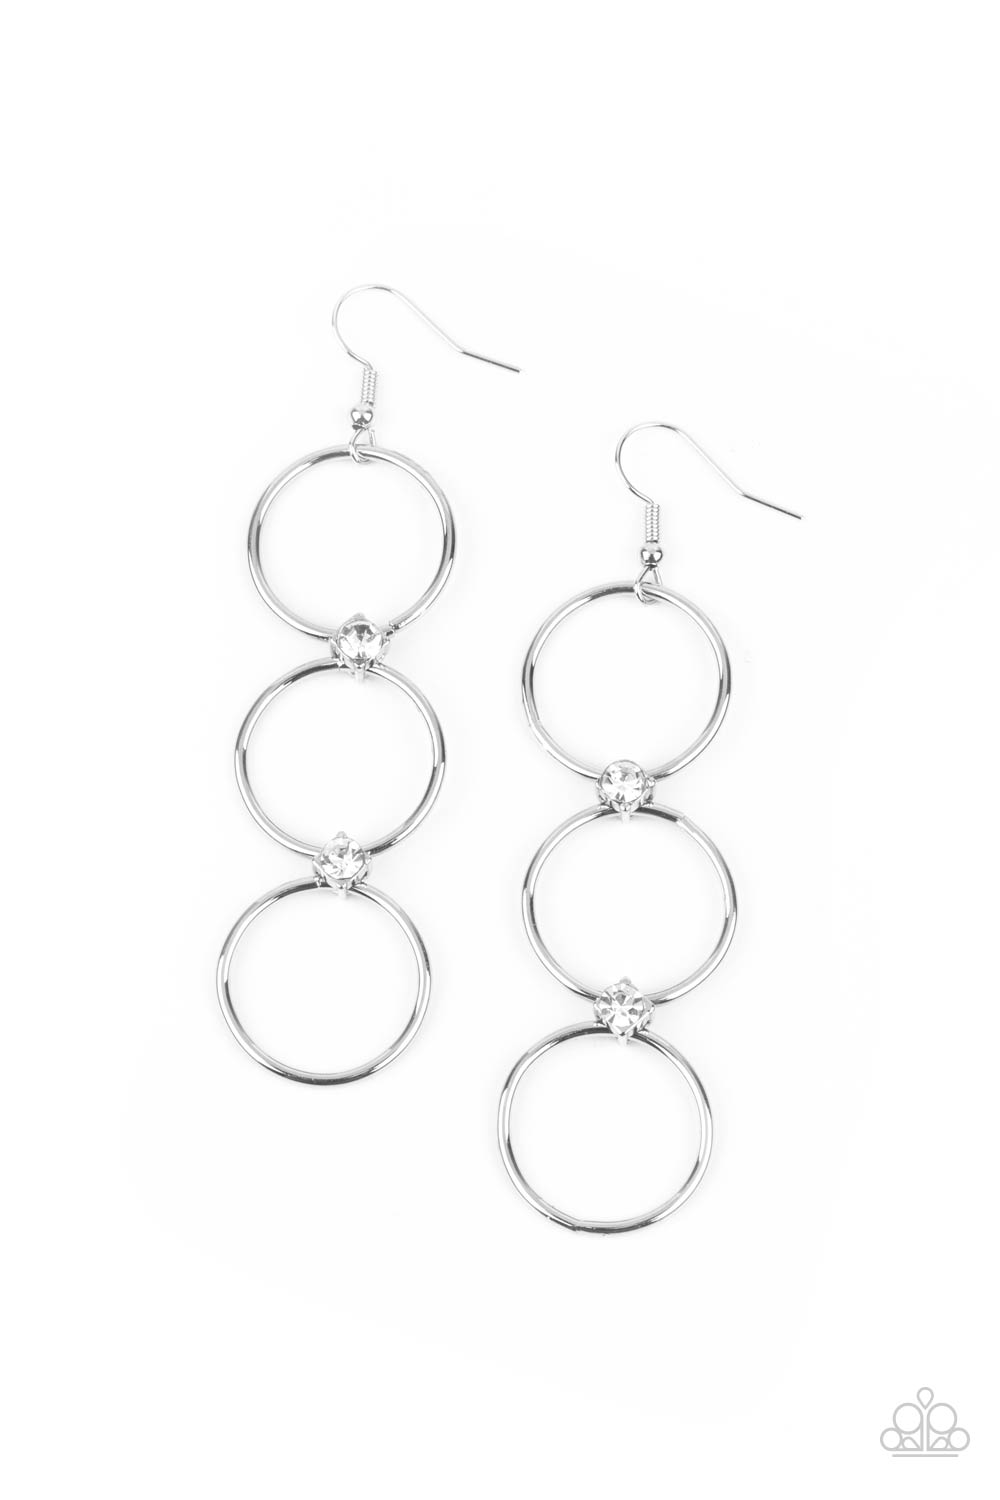 Refined Society - White Earrings - Princess Glam Shop